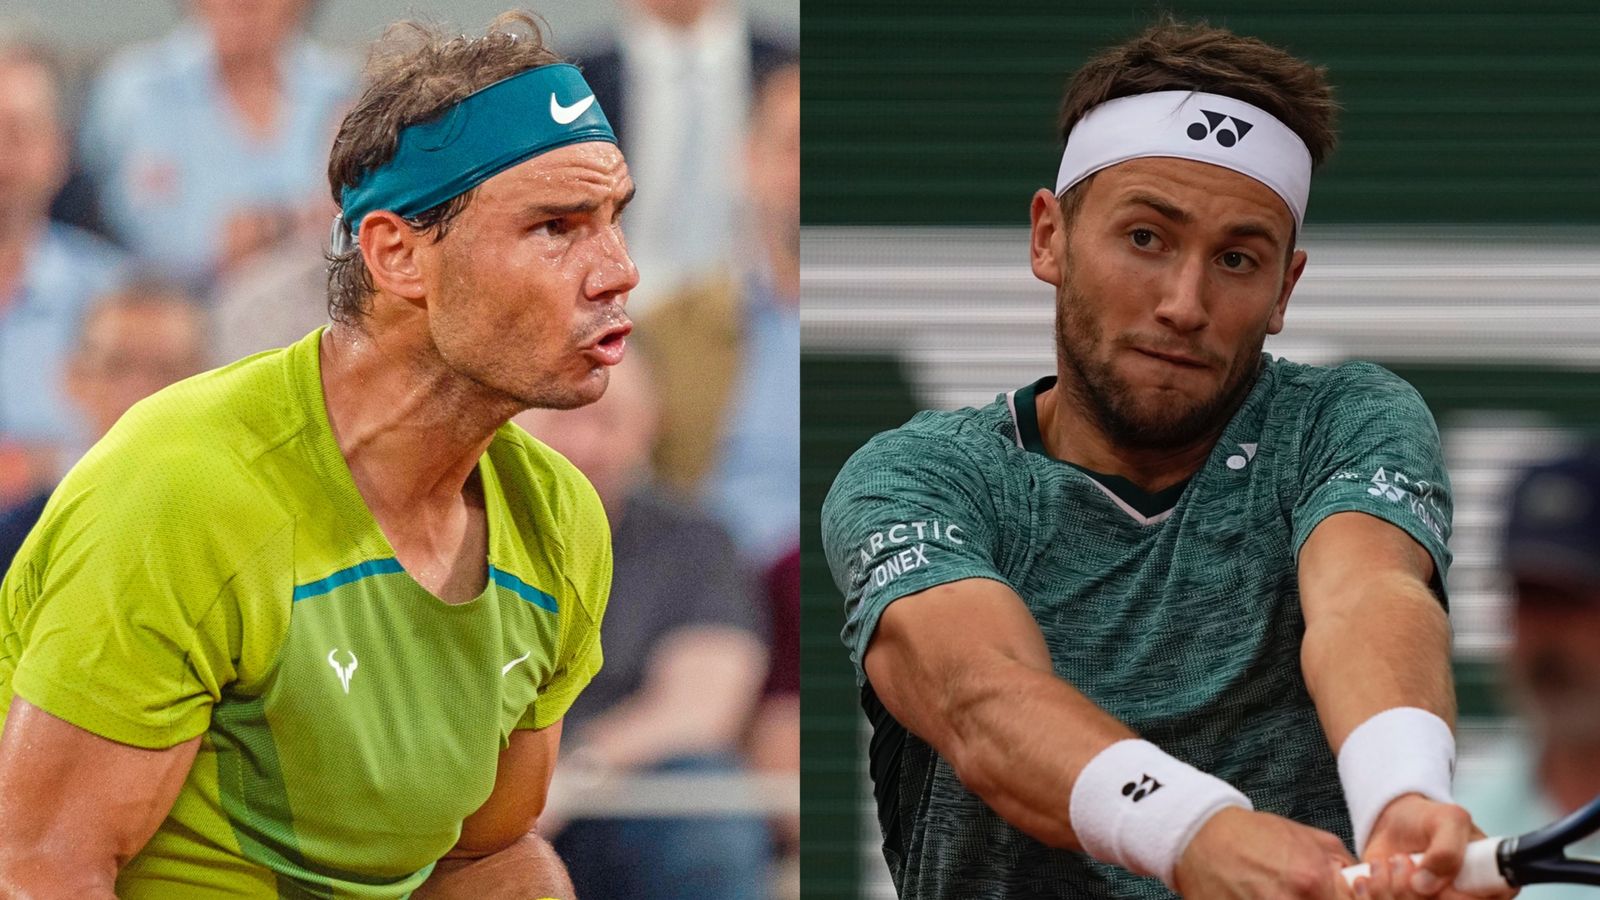 French Open Rafael Nadal and Casper Ruud to meet in final on Court Philippe-Chatrier Tennis News Sky Sports